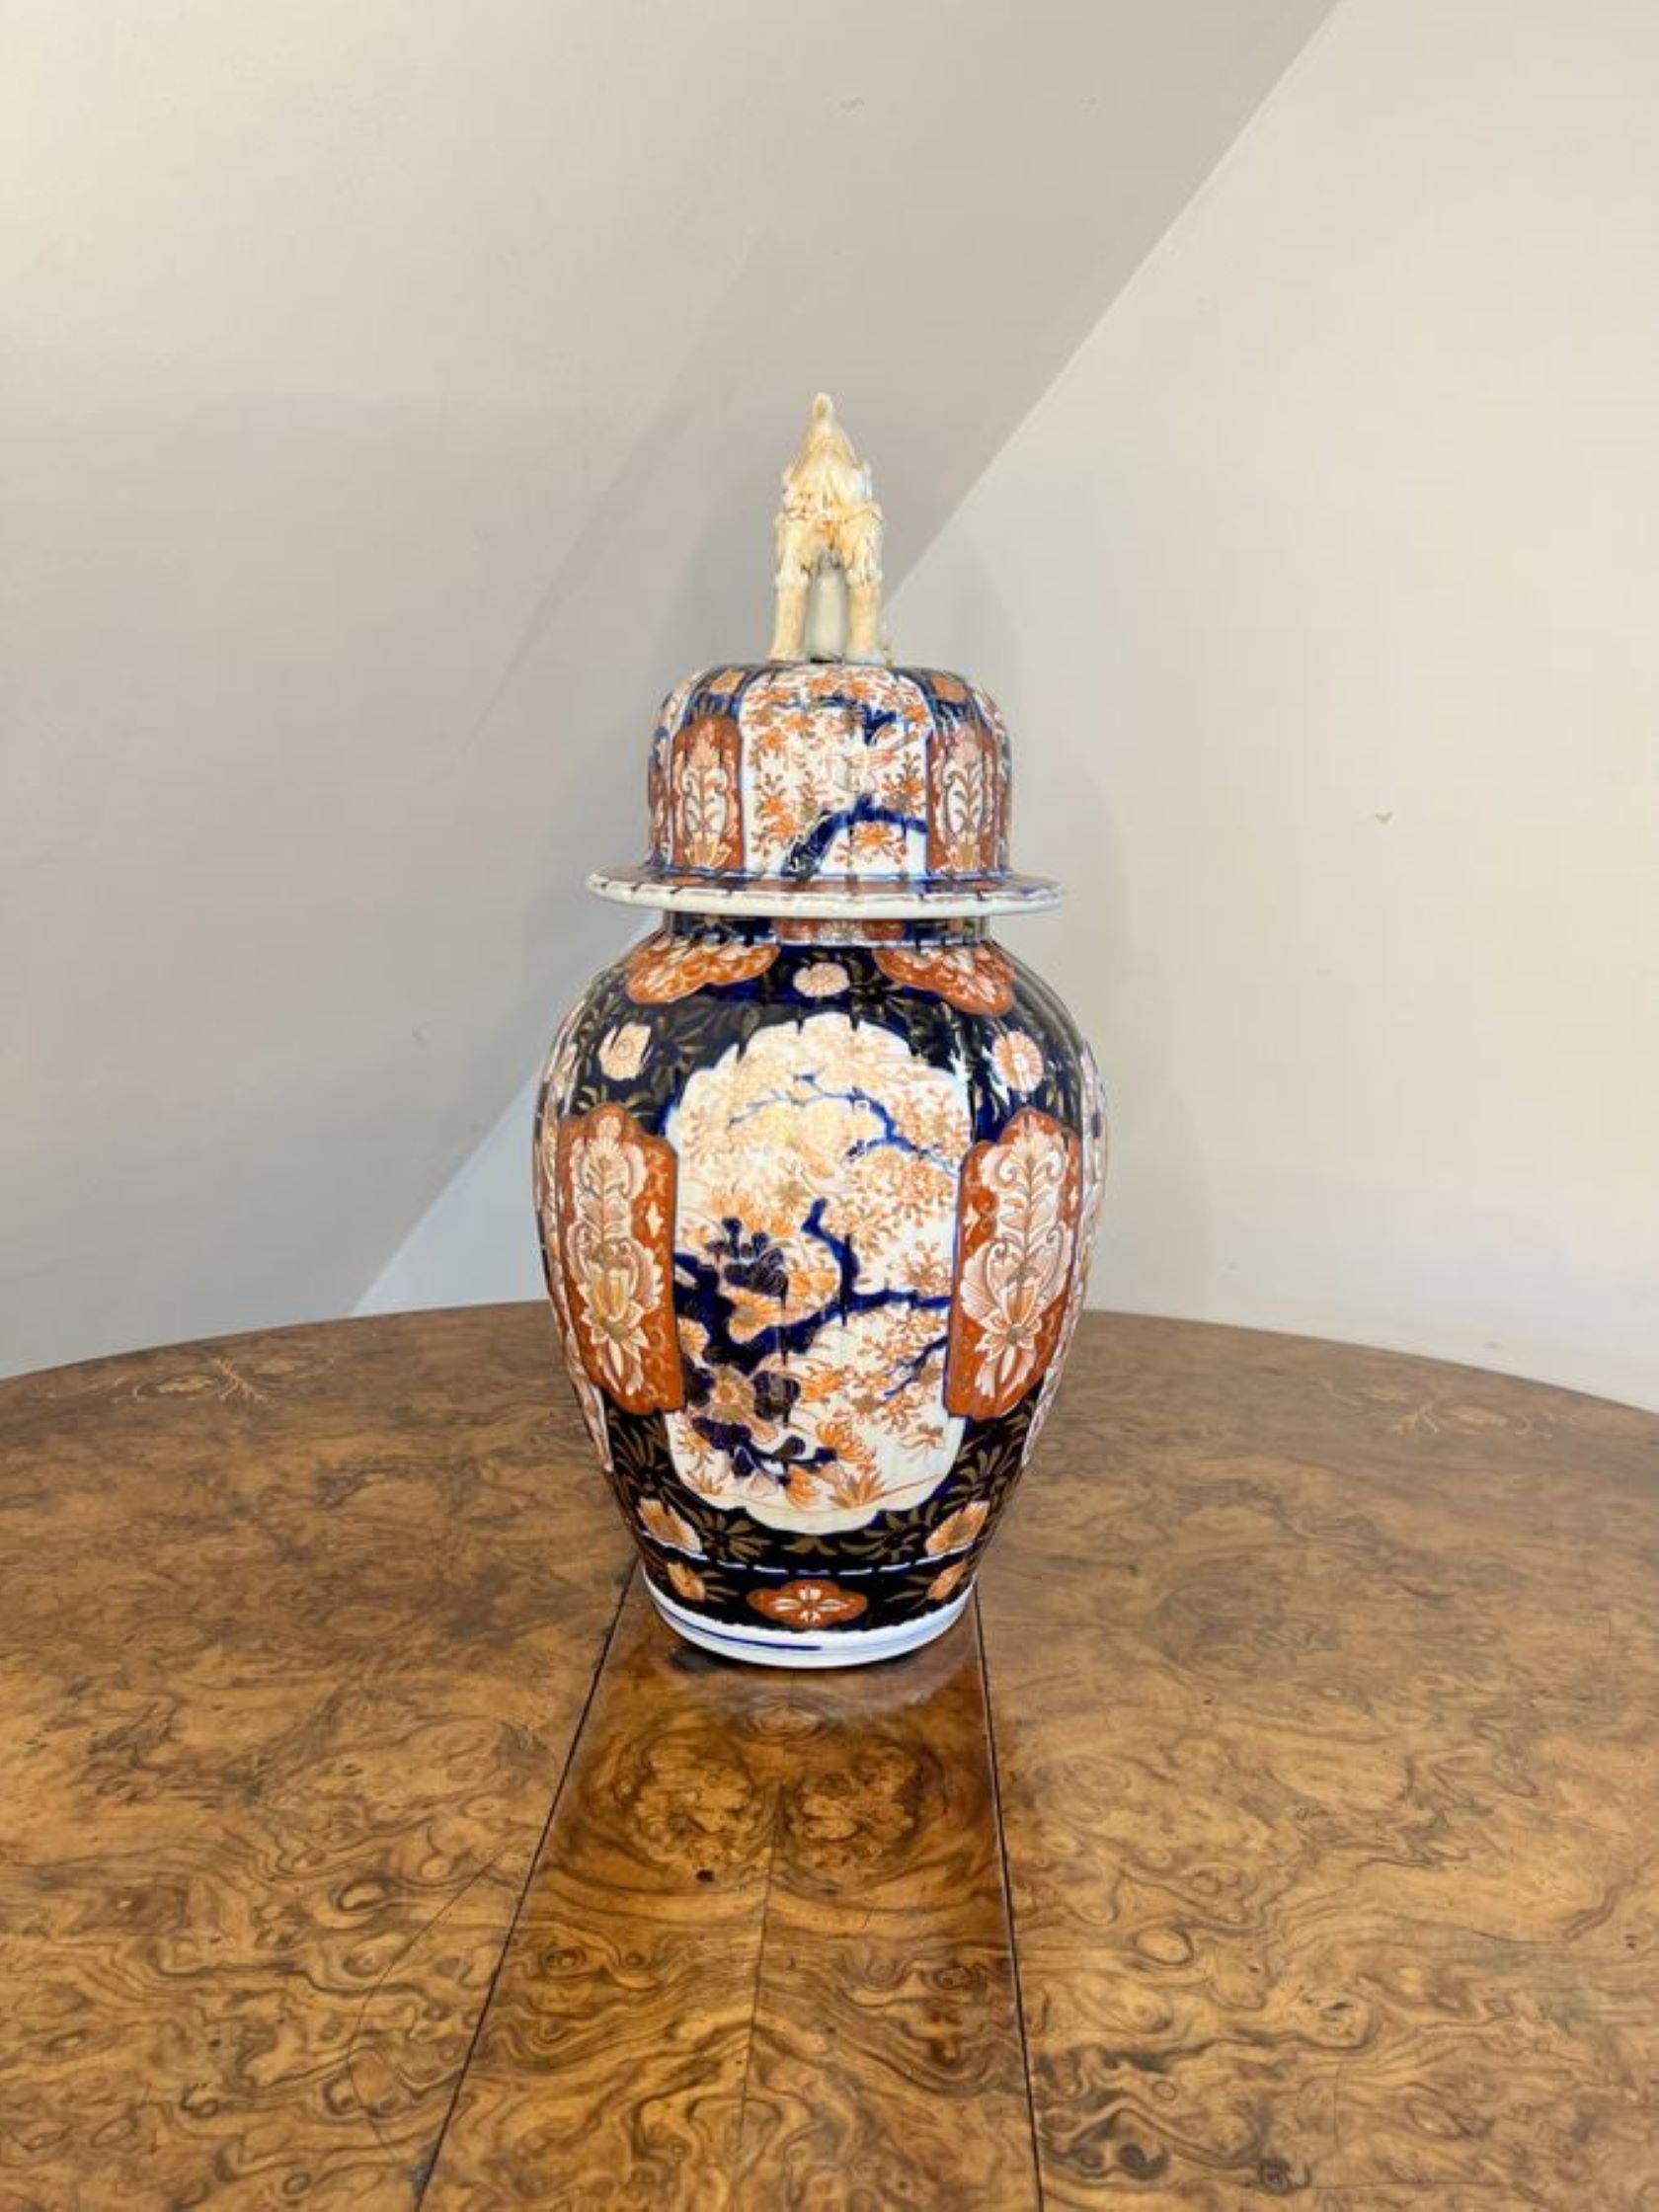 Outstanding quality large antique Japanese imari vase having a fantastic quality large Japanese imari vase, wonderful shaped body with hand painted decoration with flowers, scrolls, leaves, trees and birds in fabulous gold, blue, red and white